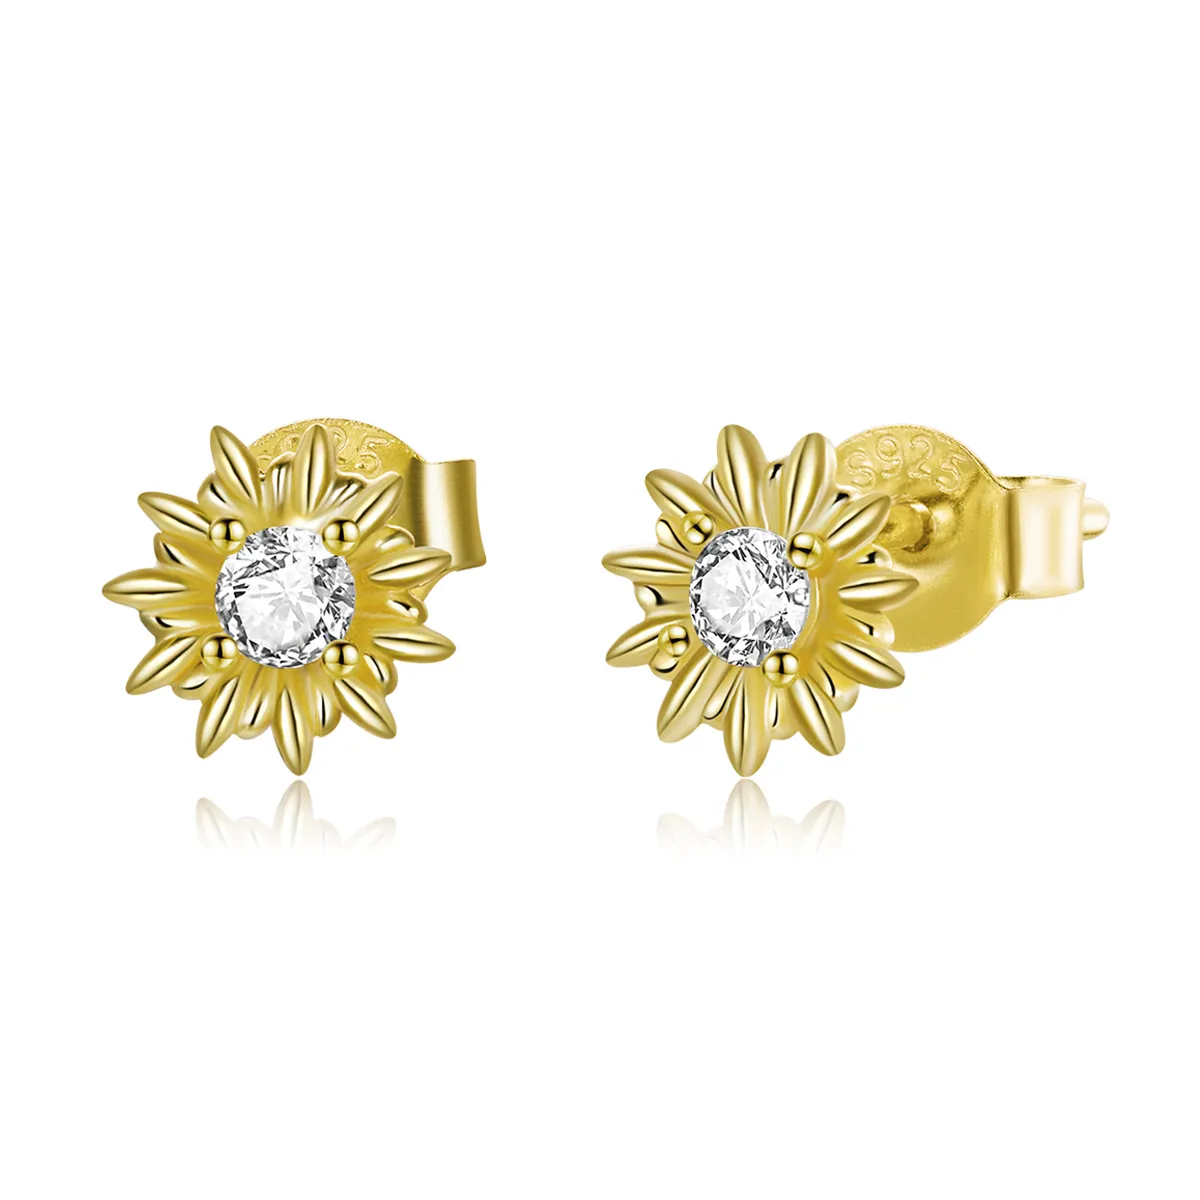 Pandora Style 18ct Gold Plated Sunflower Stud Earrings - SCE1057